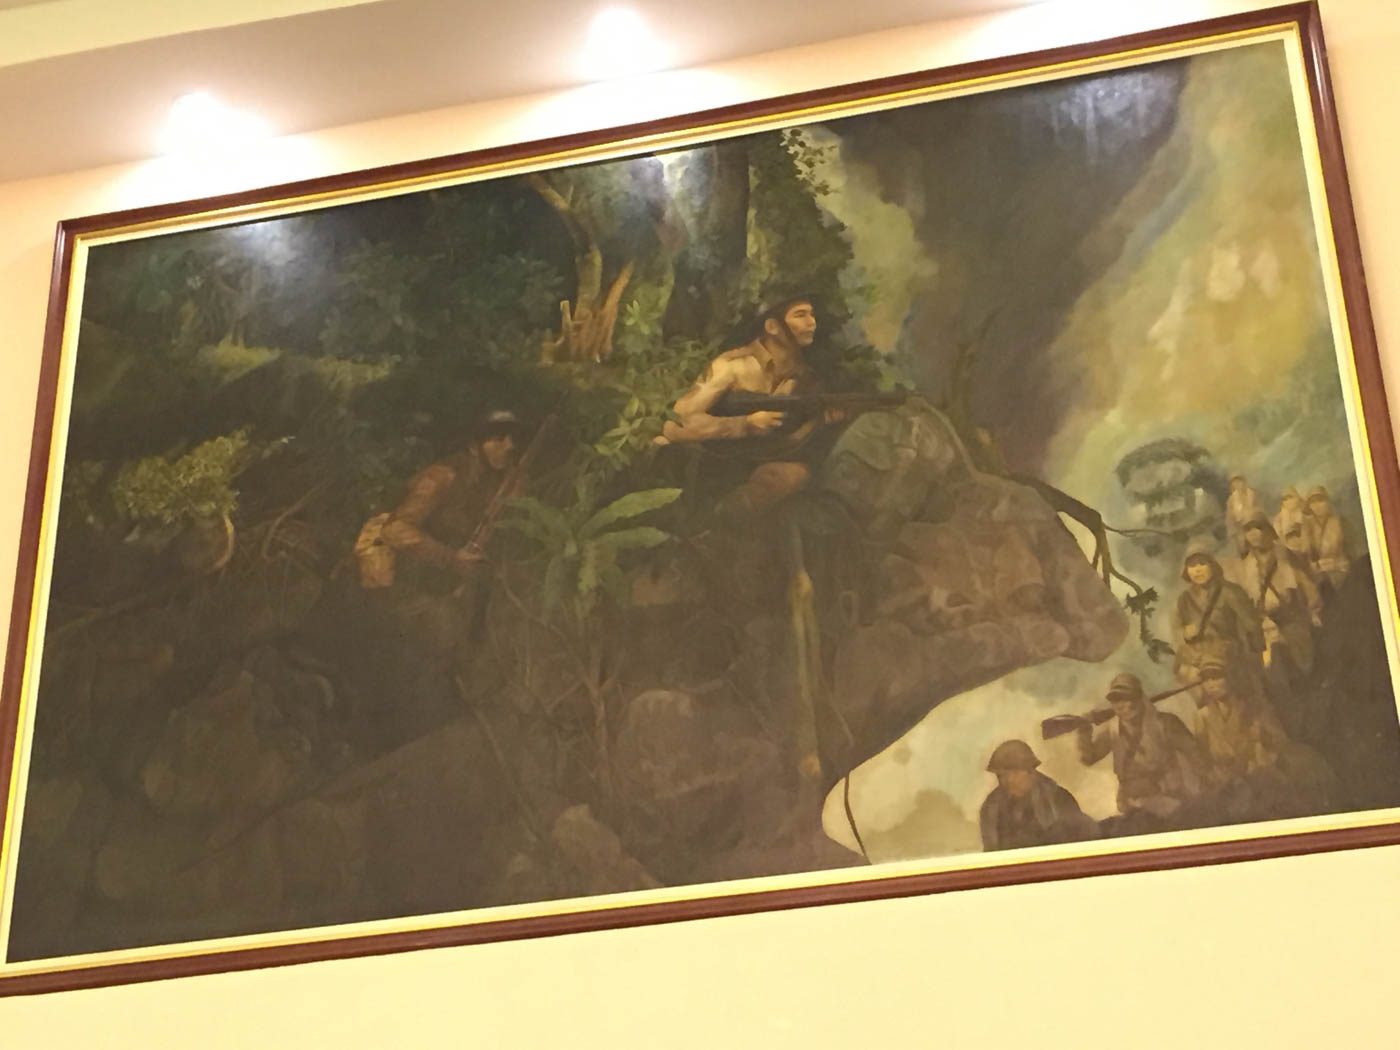 MARCOS PAINTING. This painting was commissioned by the late dictator and later, acquired by the Quezon City government. Photo by Bea Cupin/Rappler   